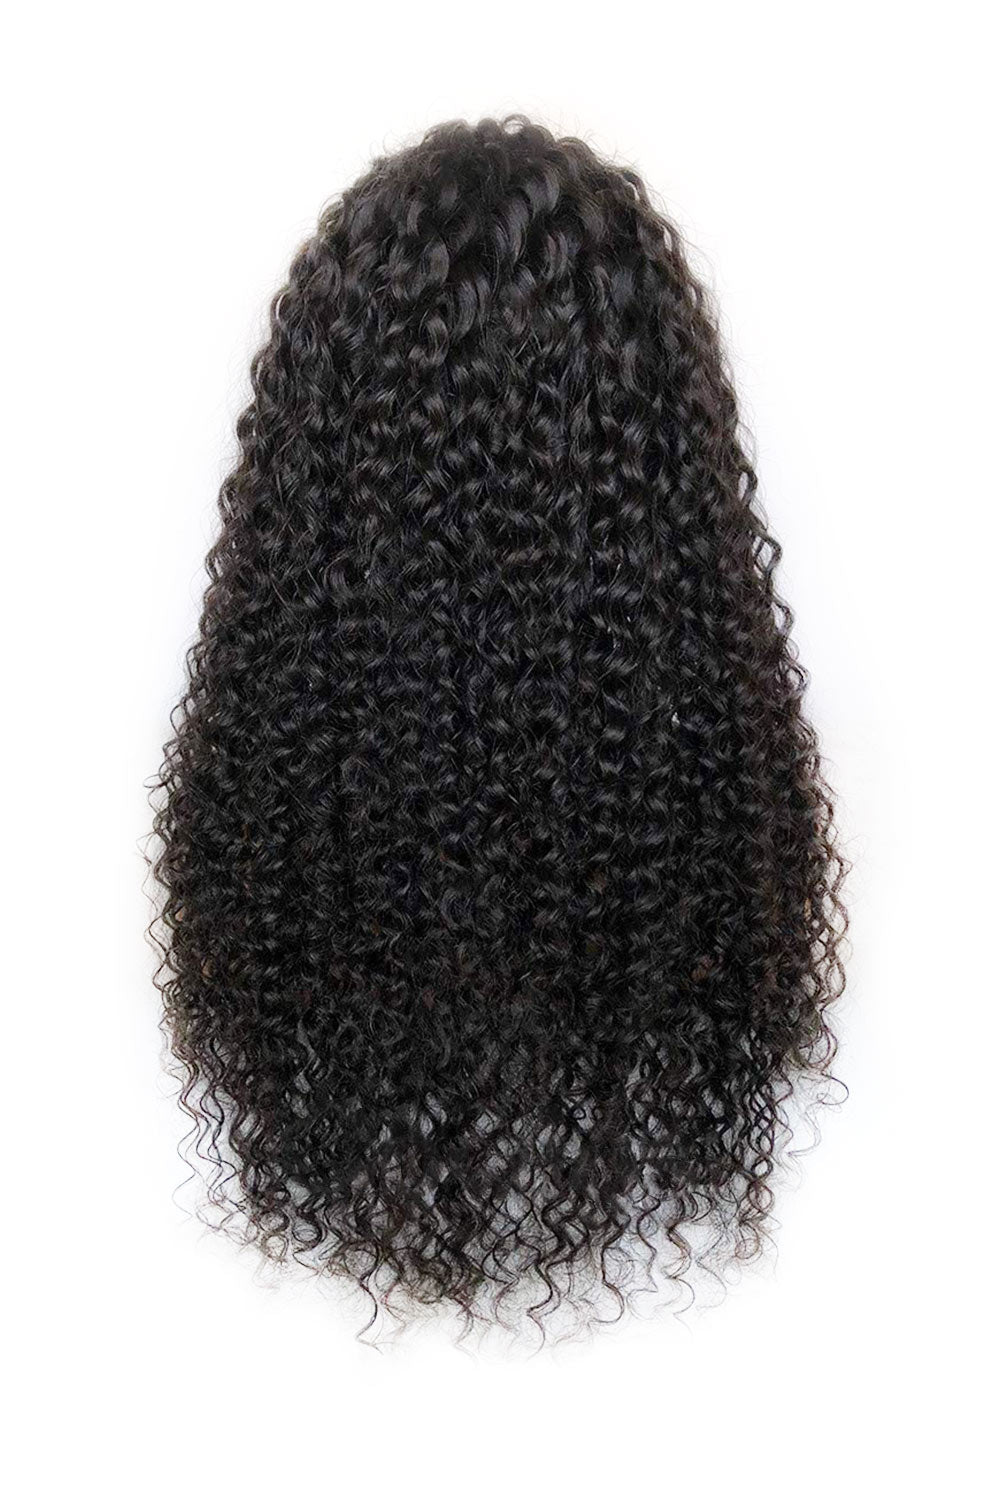 360 Lace Deep Curly Wigs 3604